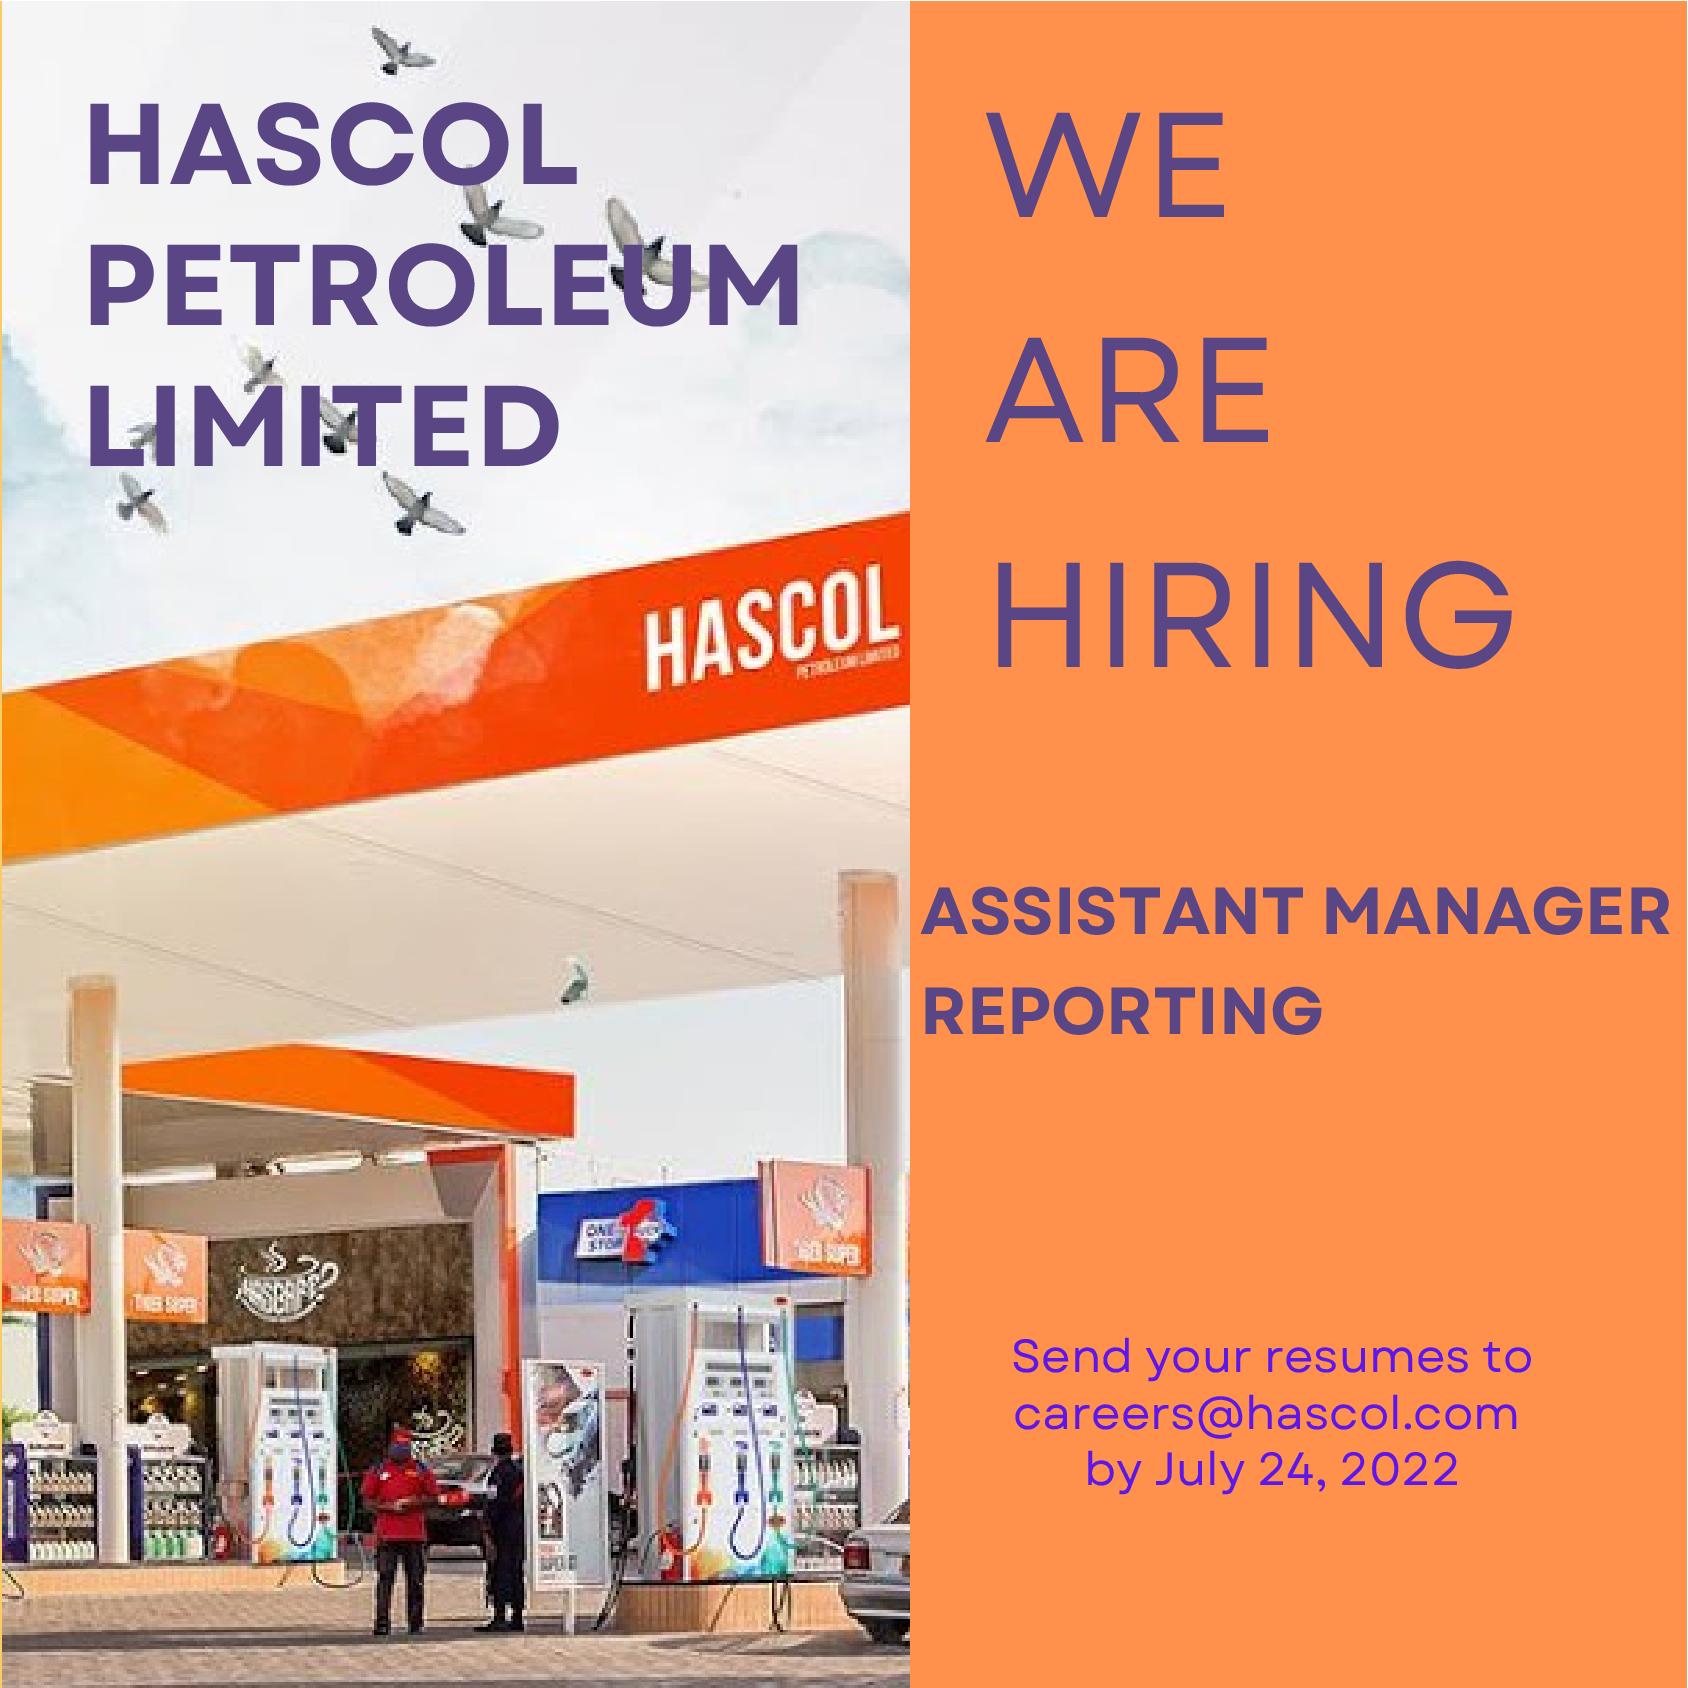 Hascol Petroleum Limited Jobs For ASSISTANT MANAGER REPORTING